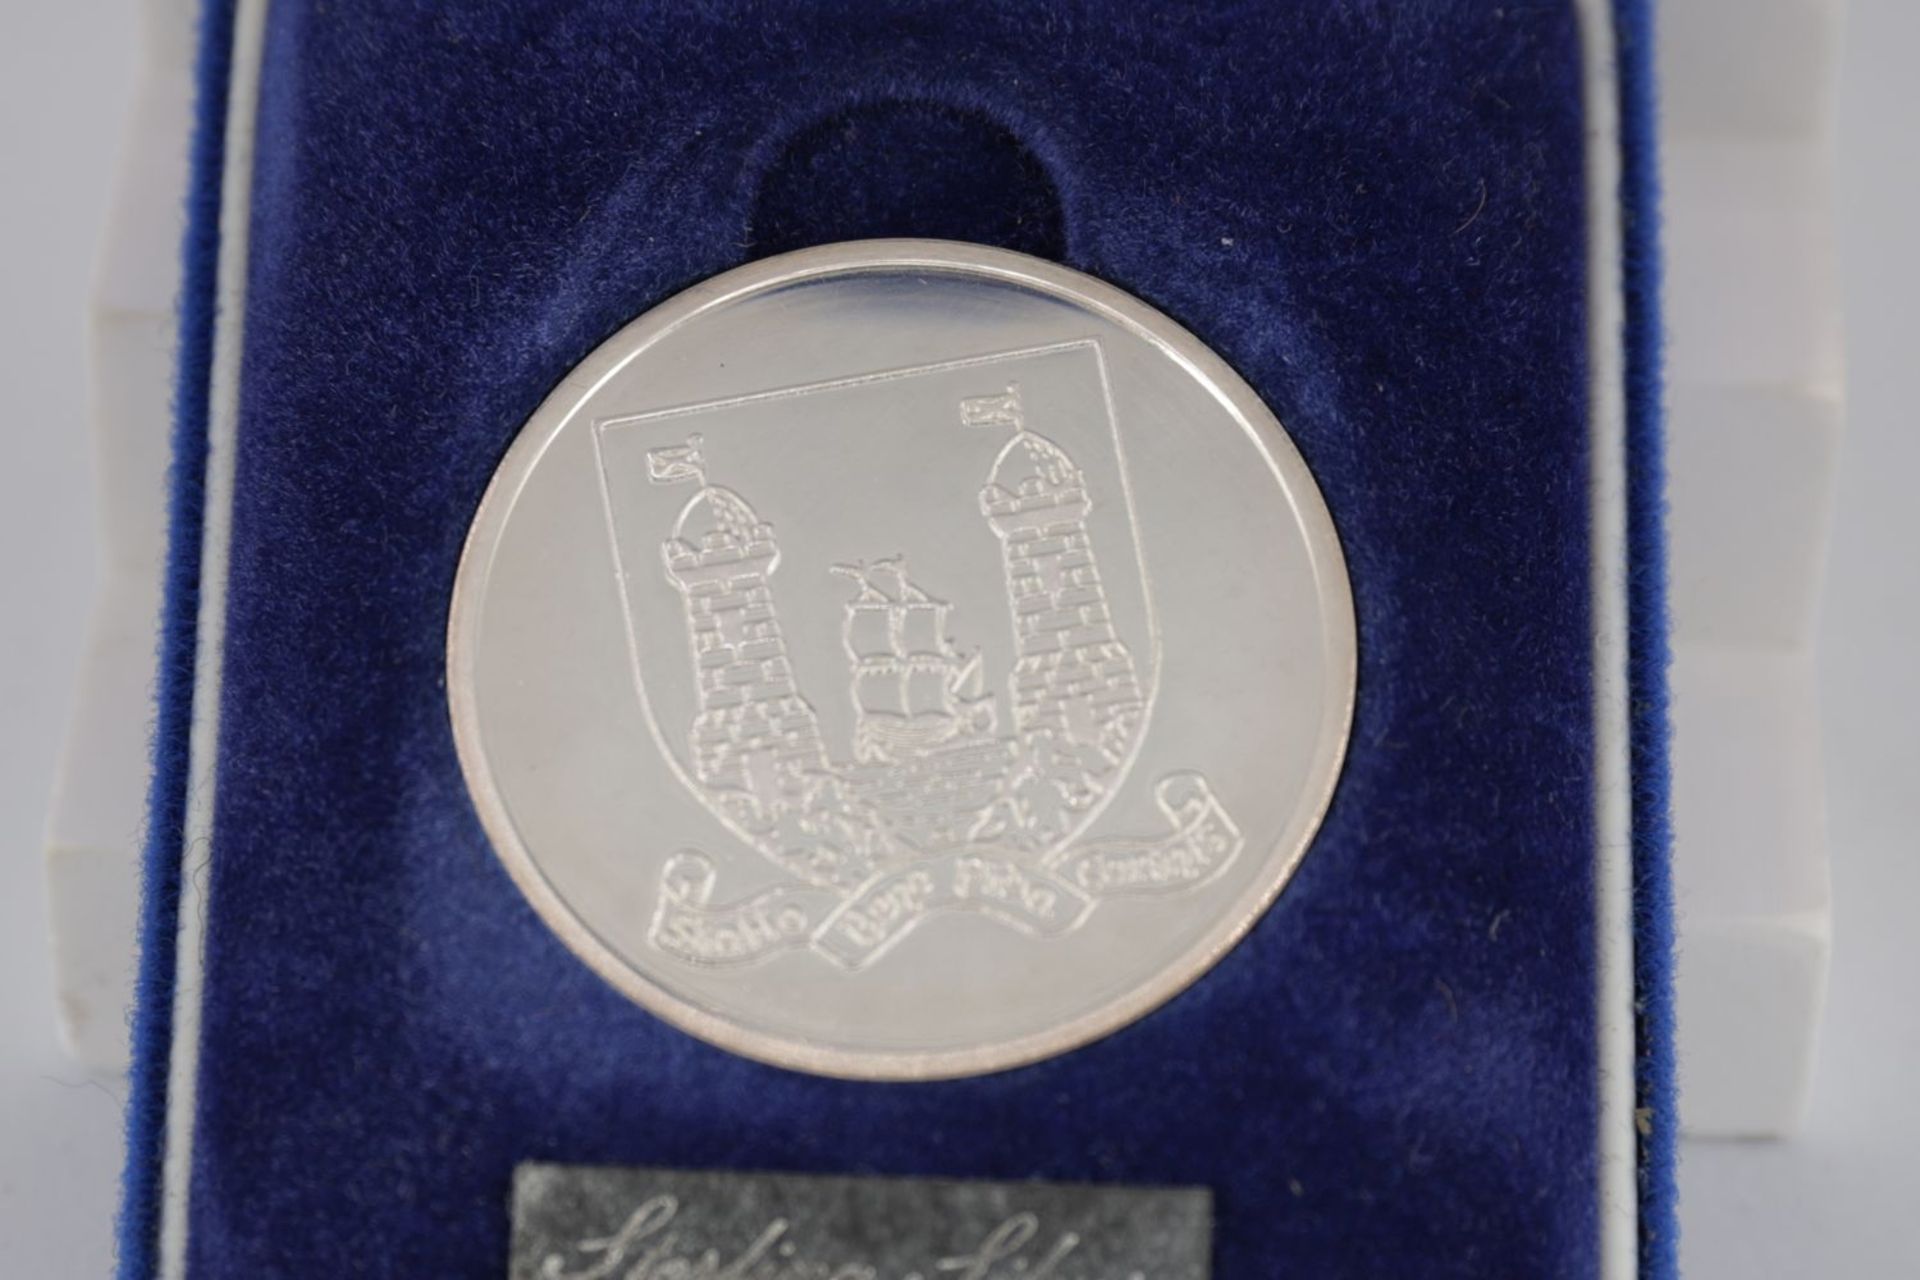 CORK COMMEMORATIVE STERLING SILVER COIN - Image 3 of 4